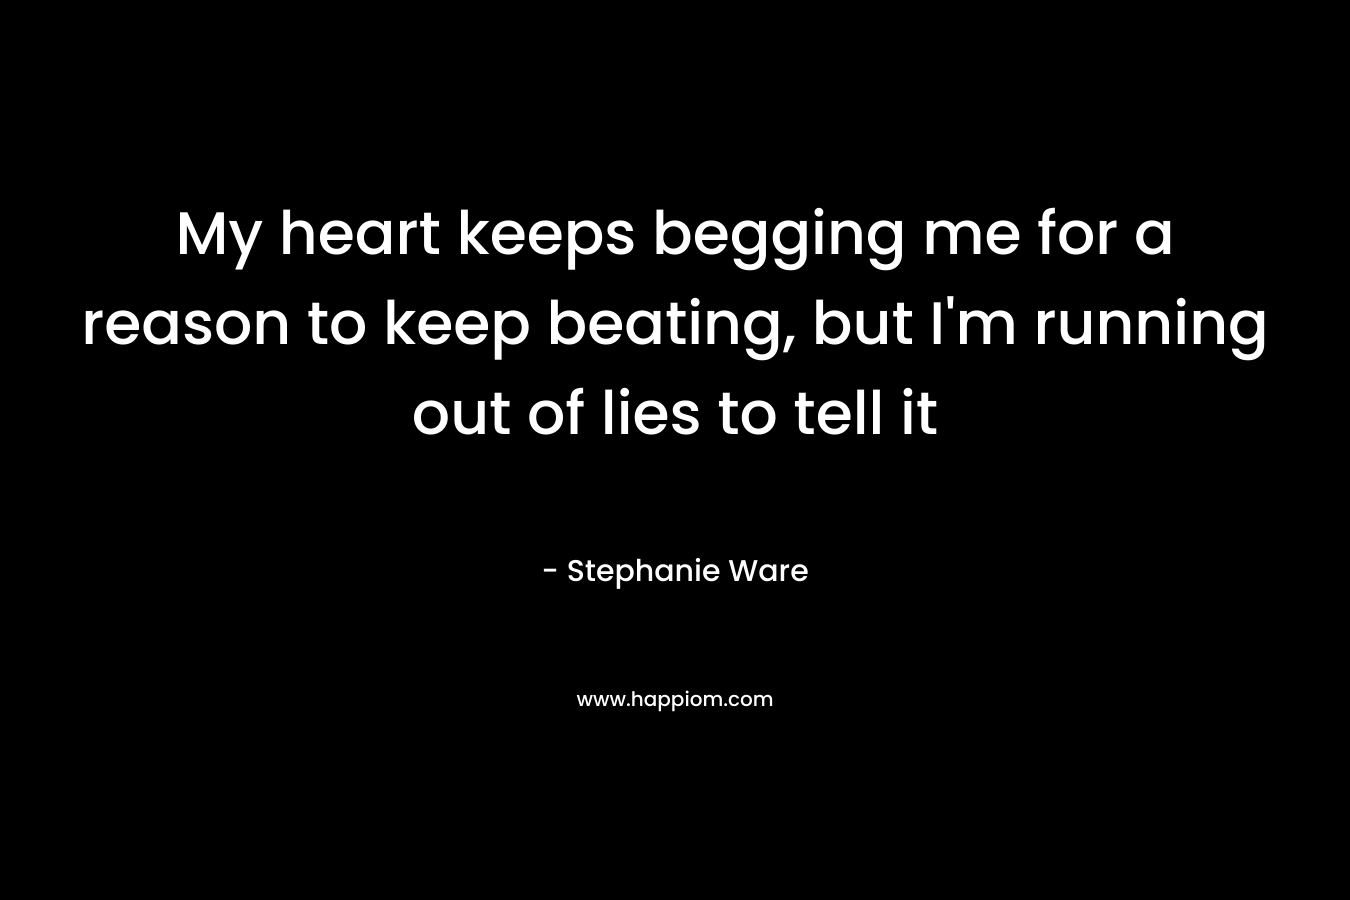 My heart keeps begging me for a reason to keep beating, but I’m running out of lies to tell it – Stephanie Ware